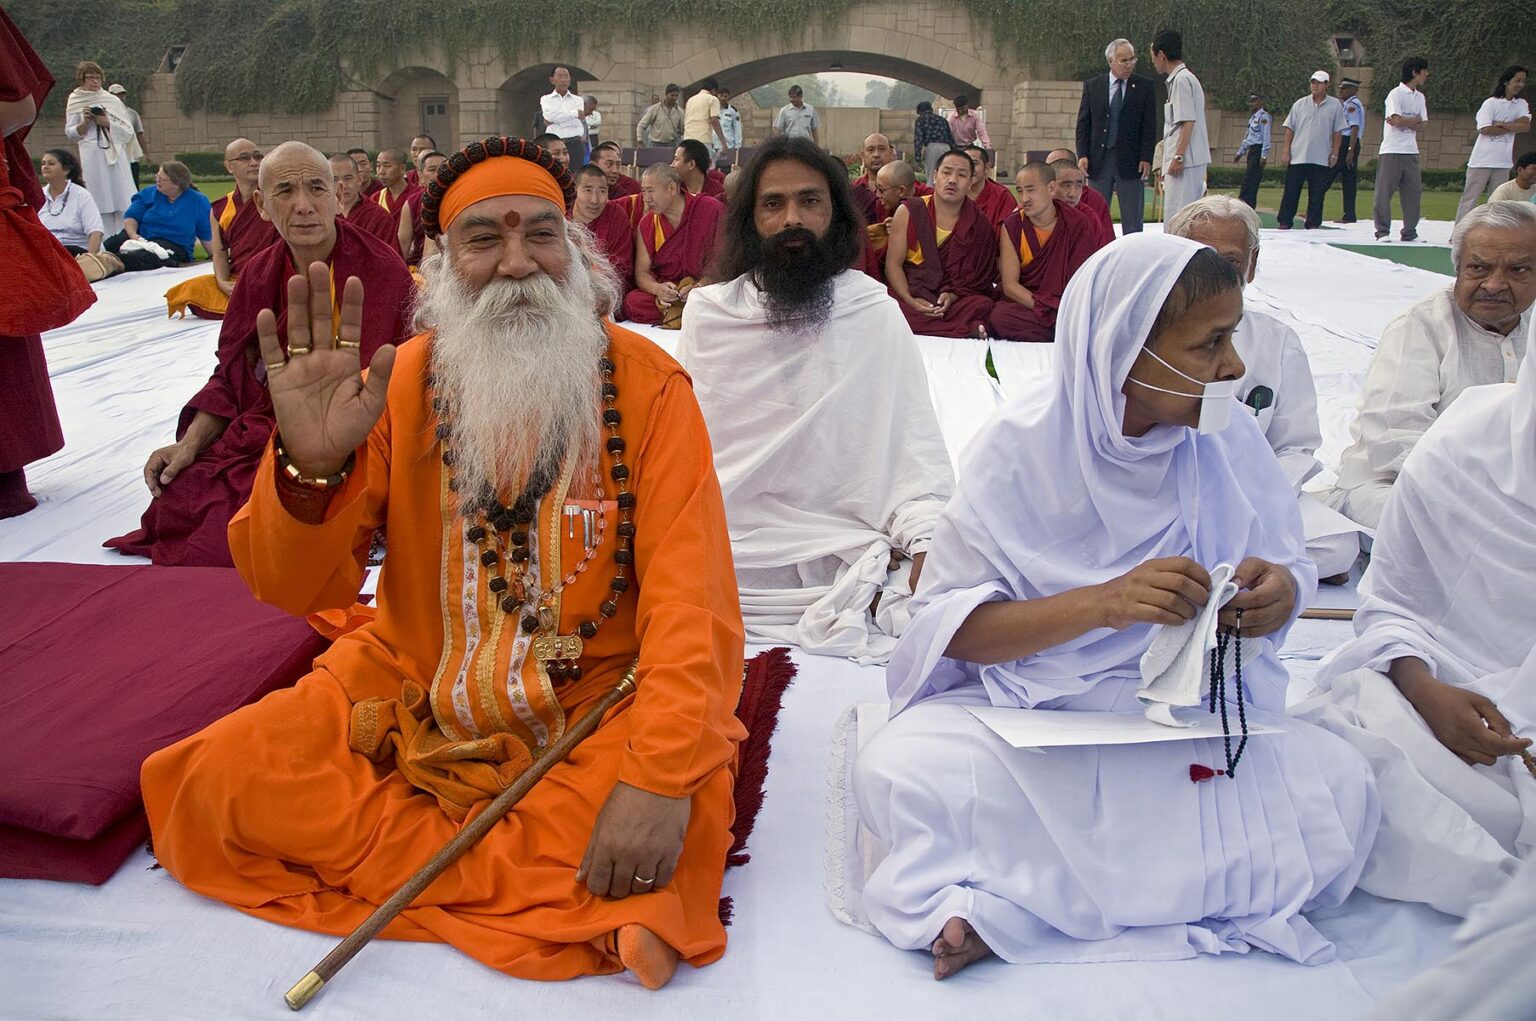 Hindus, Jains and Buddhists attend a PRAYER FOR WORLD PEACE sponsored by the 14th Dalai Lama of Tibet at the RAJ GHAT (Ghandi's eternal flame) in April of 2008 -  NEW DELHI, INDIA